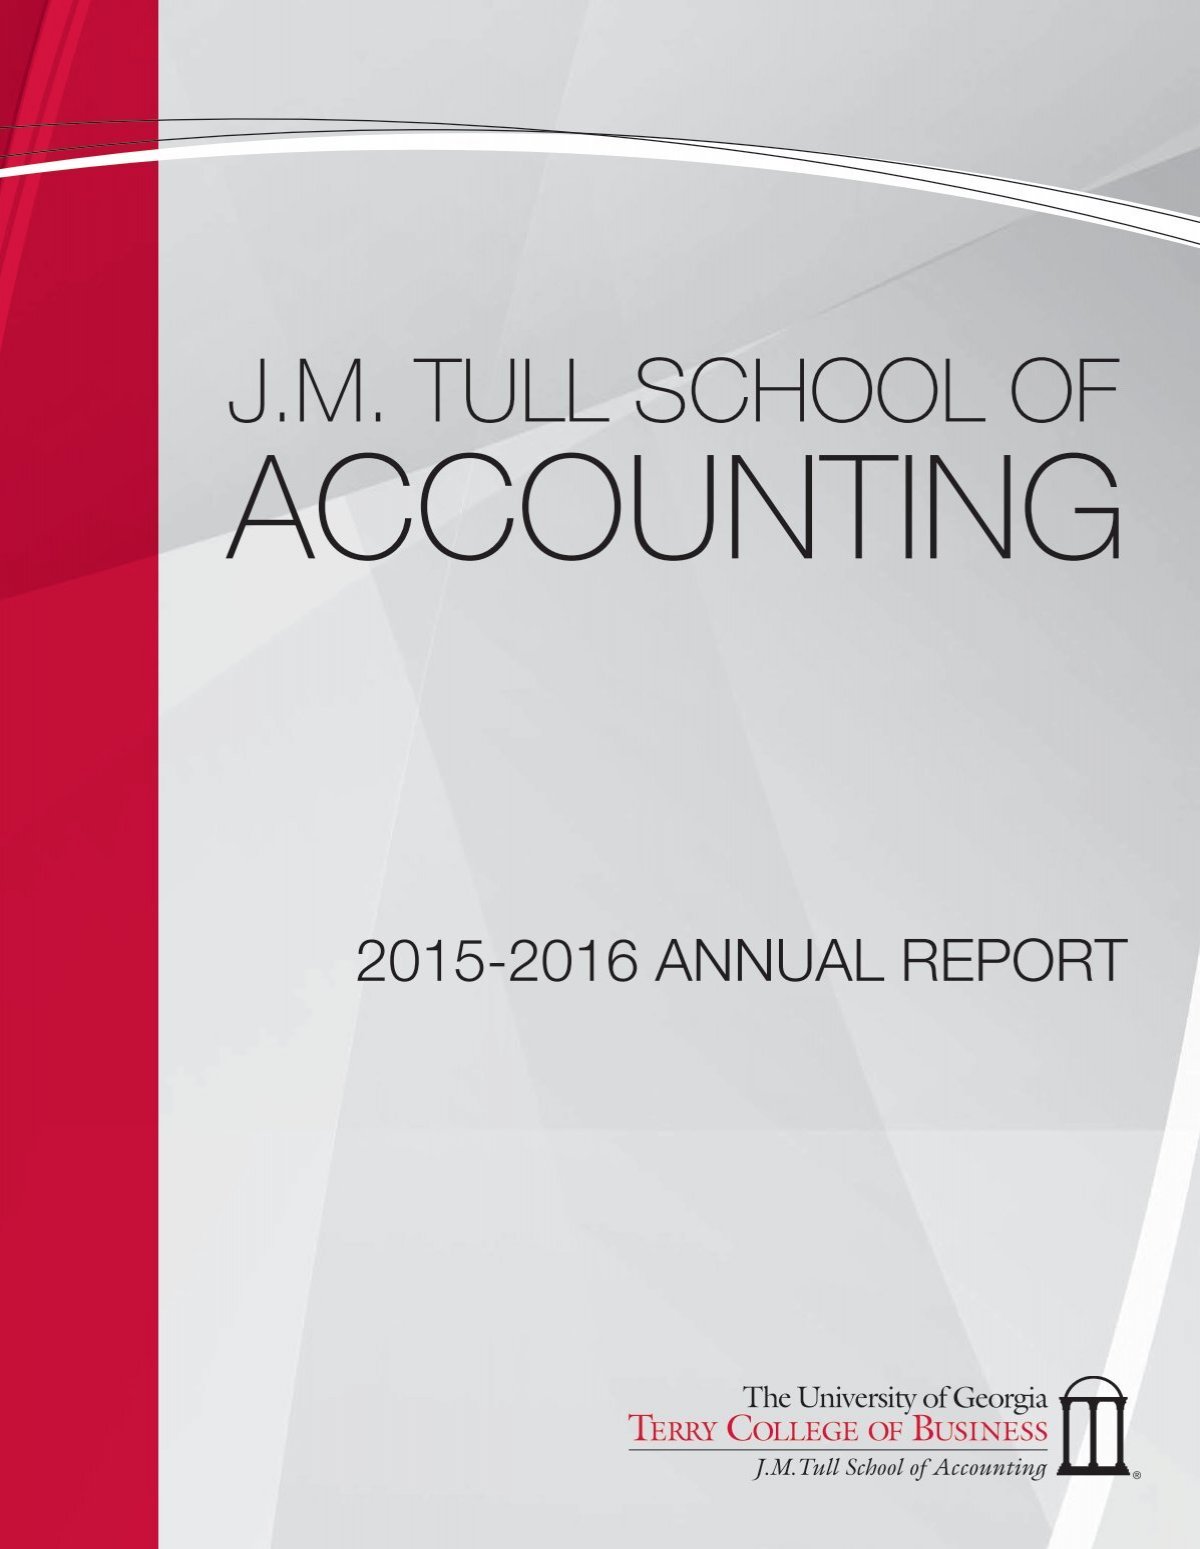 Dennis (Denny) R. Beresford, Executive-in-Residence, J.M. Tull School of  Accounting at Terry College of Business